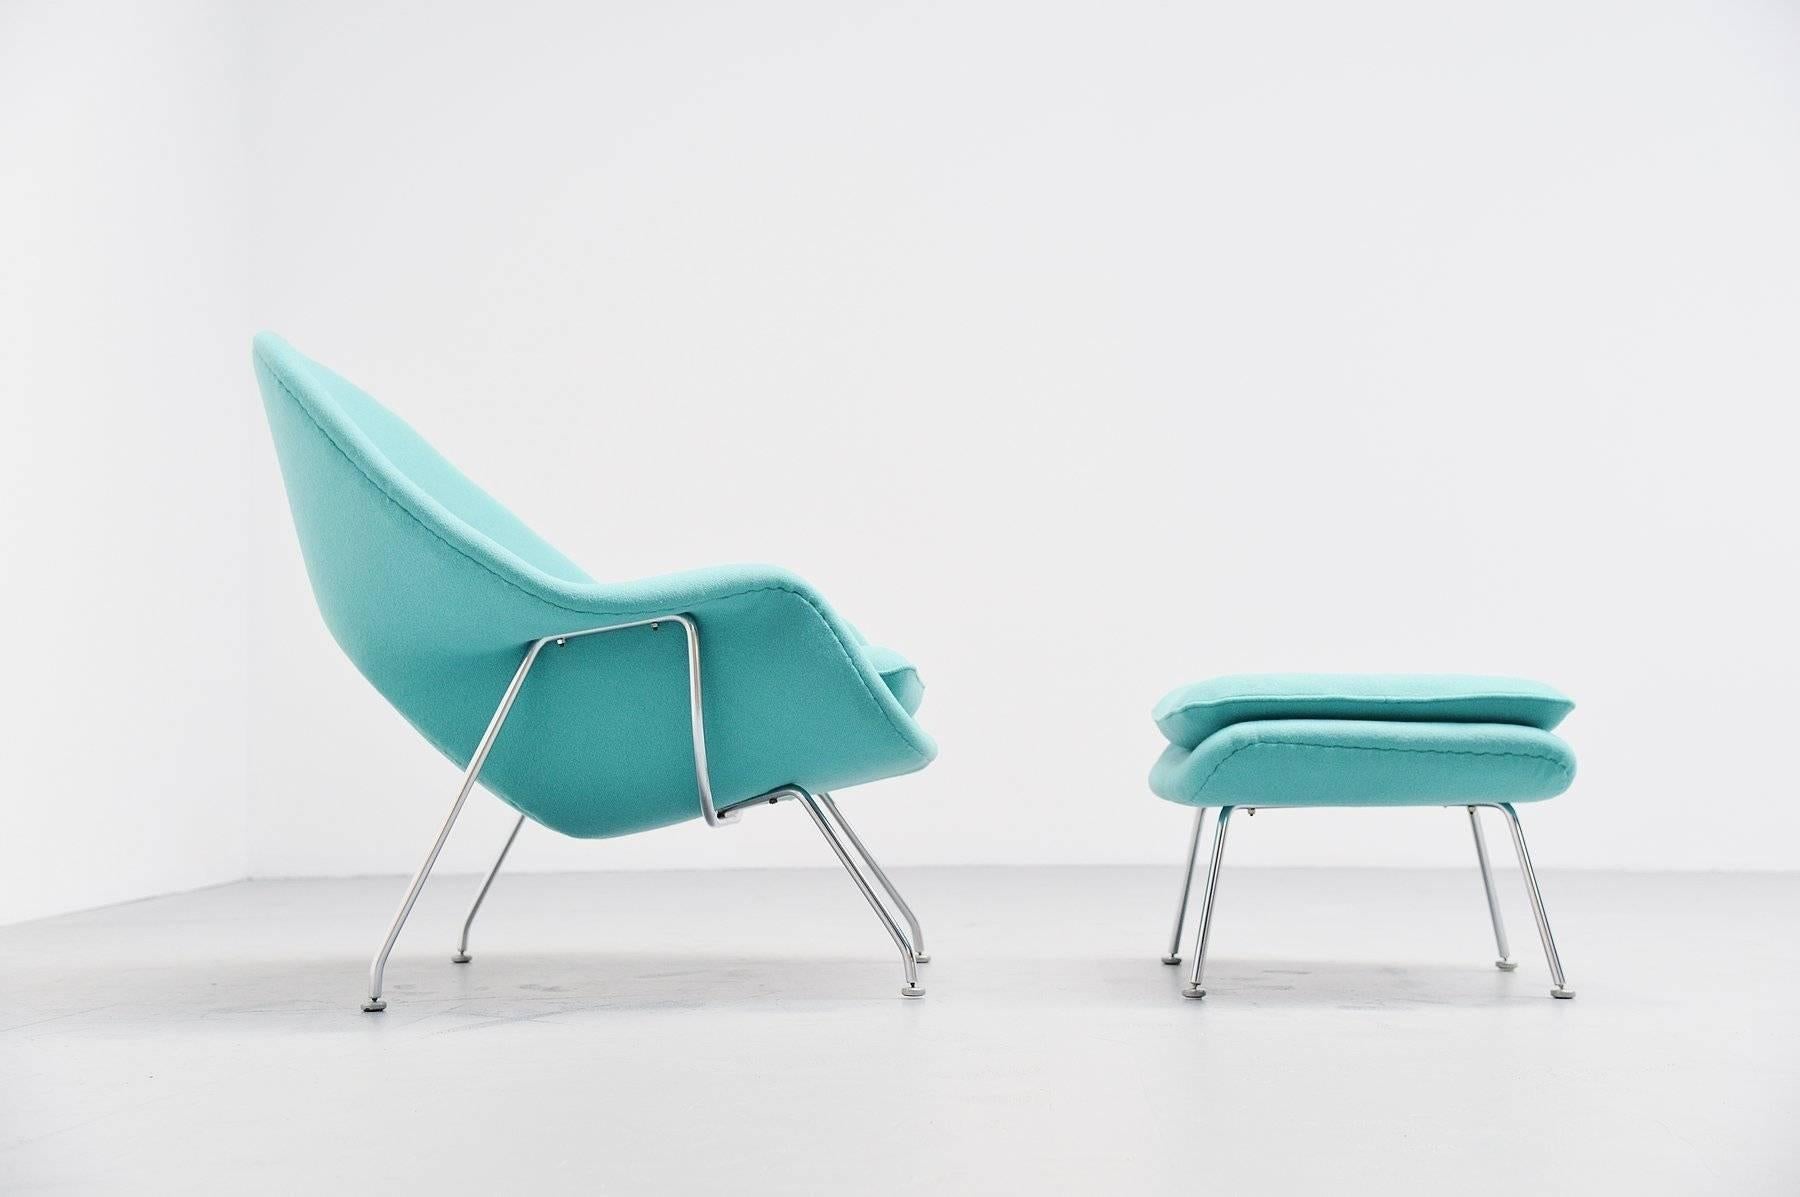 This design Icon, the so called Womb chair, was designed by Eero Saarinen and produced by Knoll International. This womb chair is from the first production in the 1950s and has a brushed tubular steel structure and its newly upholstered with